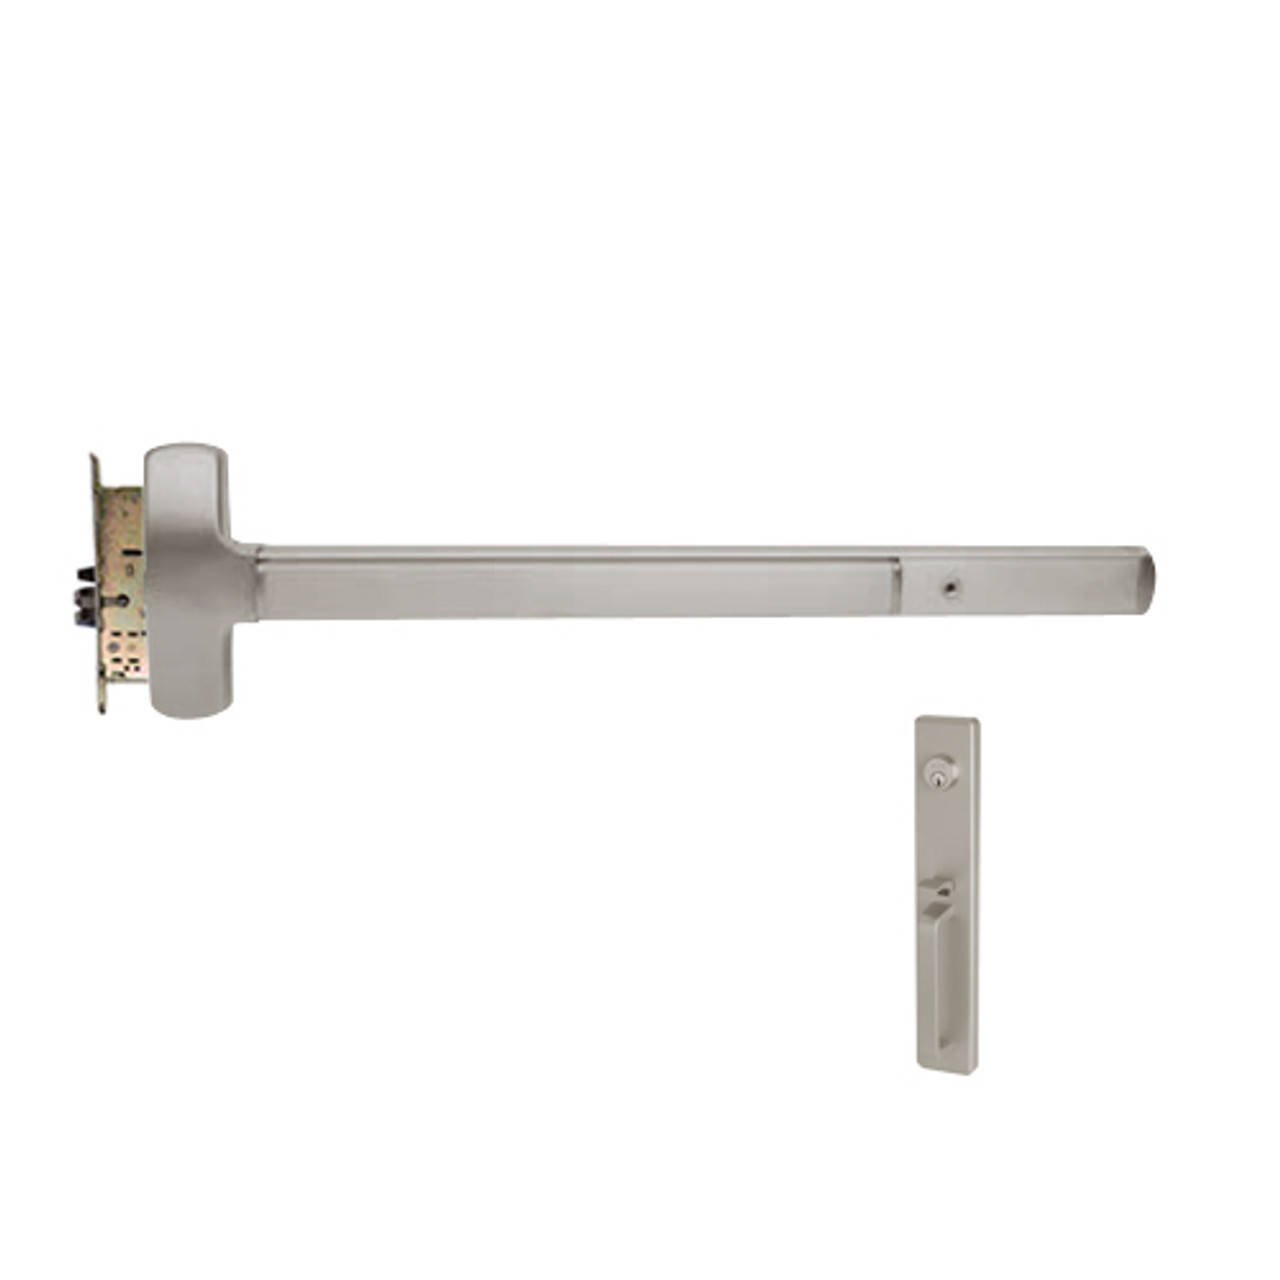 25-M-TP-US32D-4-LHR Falcon Exit Device in Satin Stainless Steel